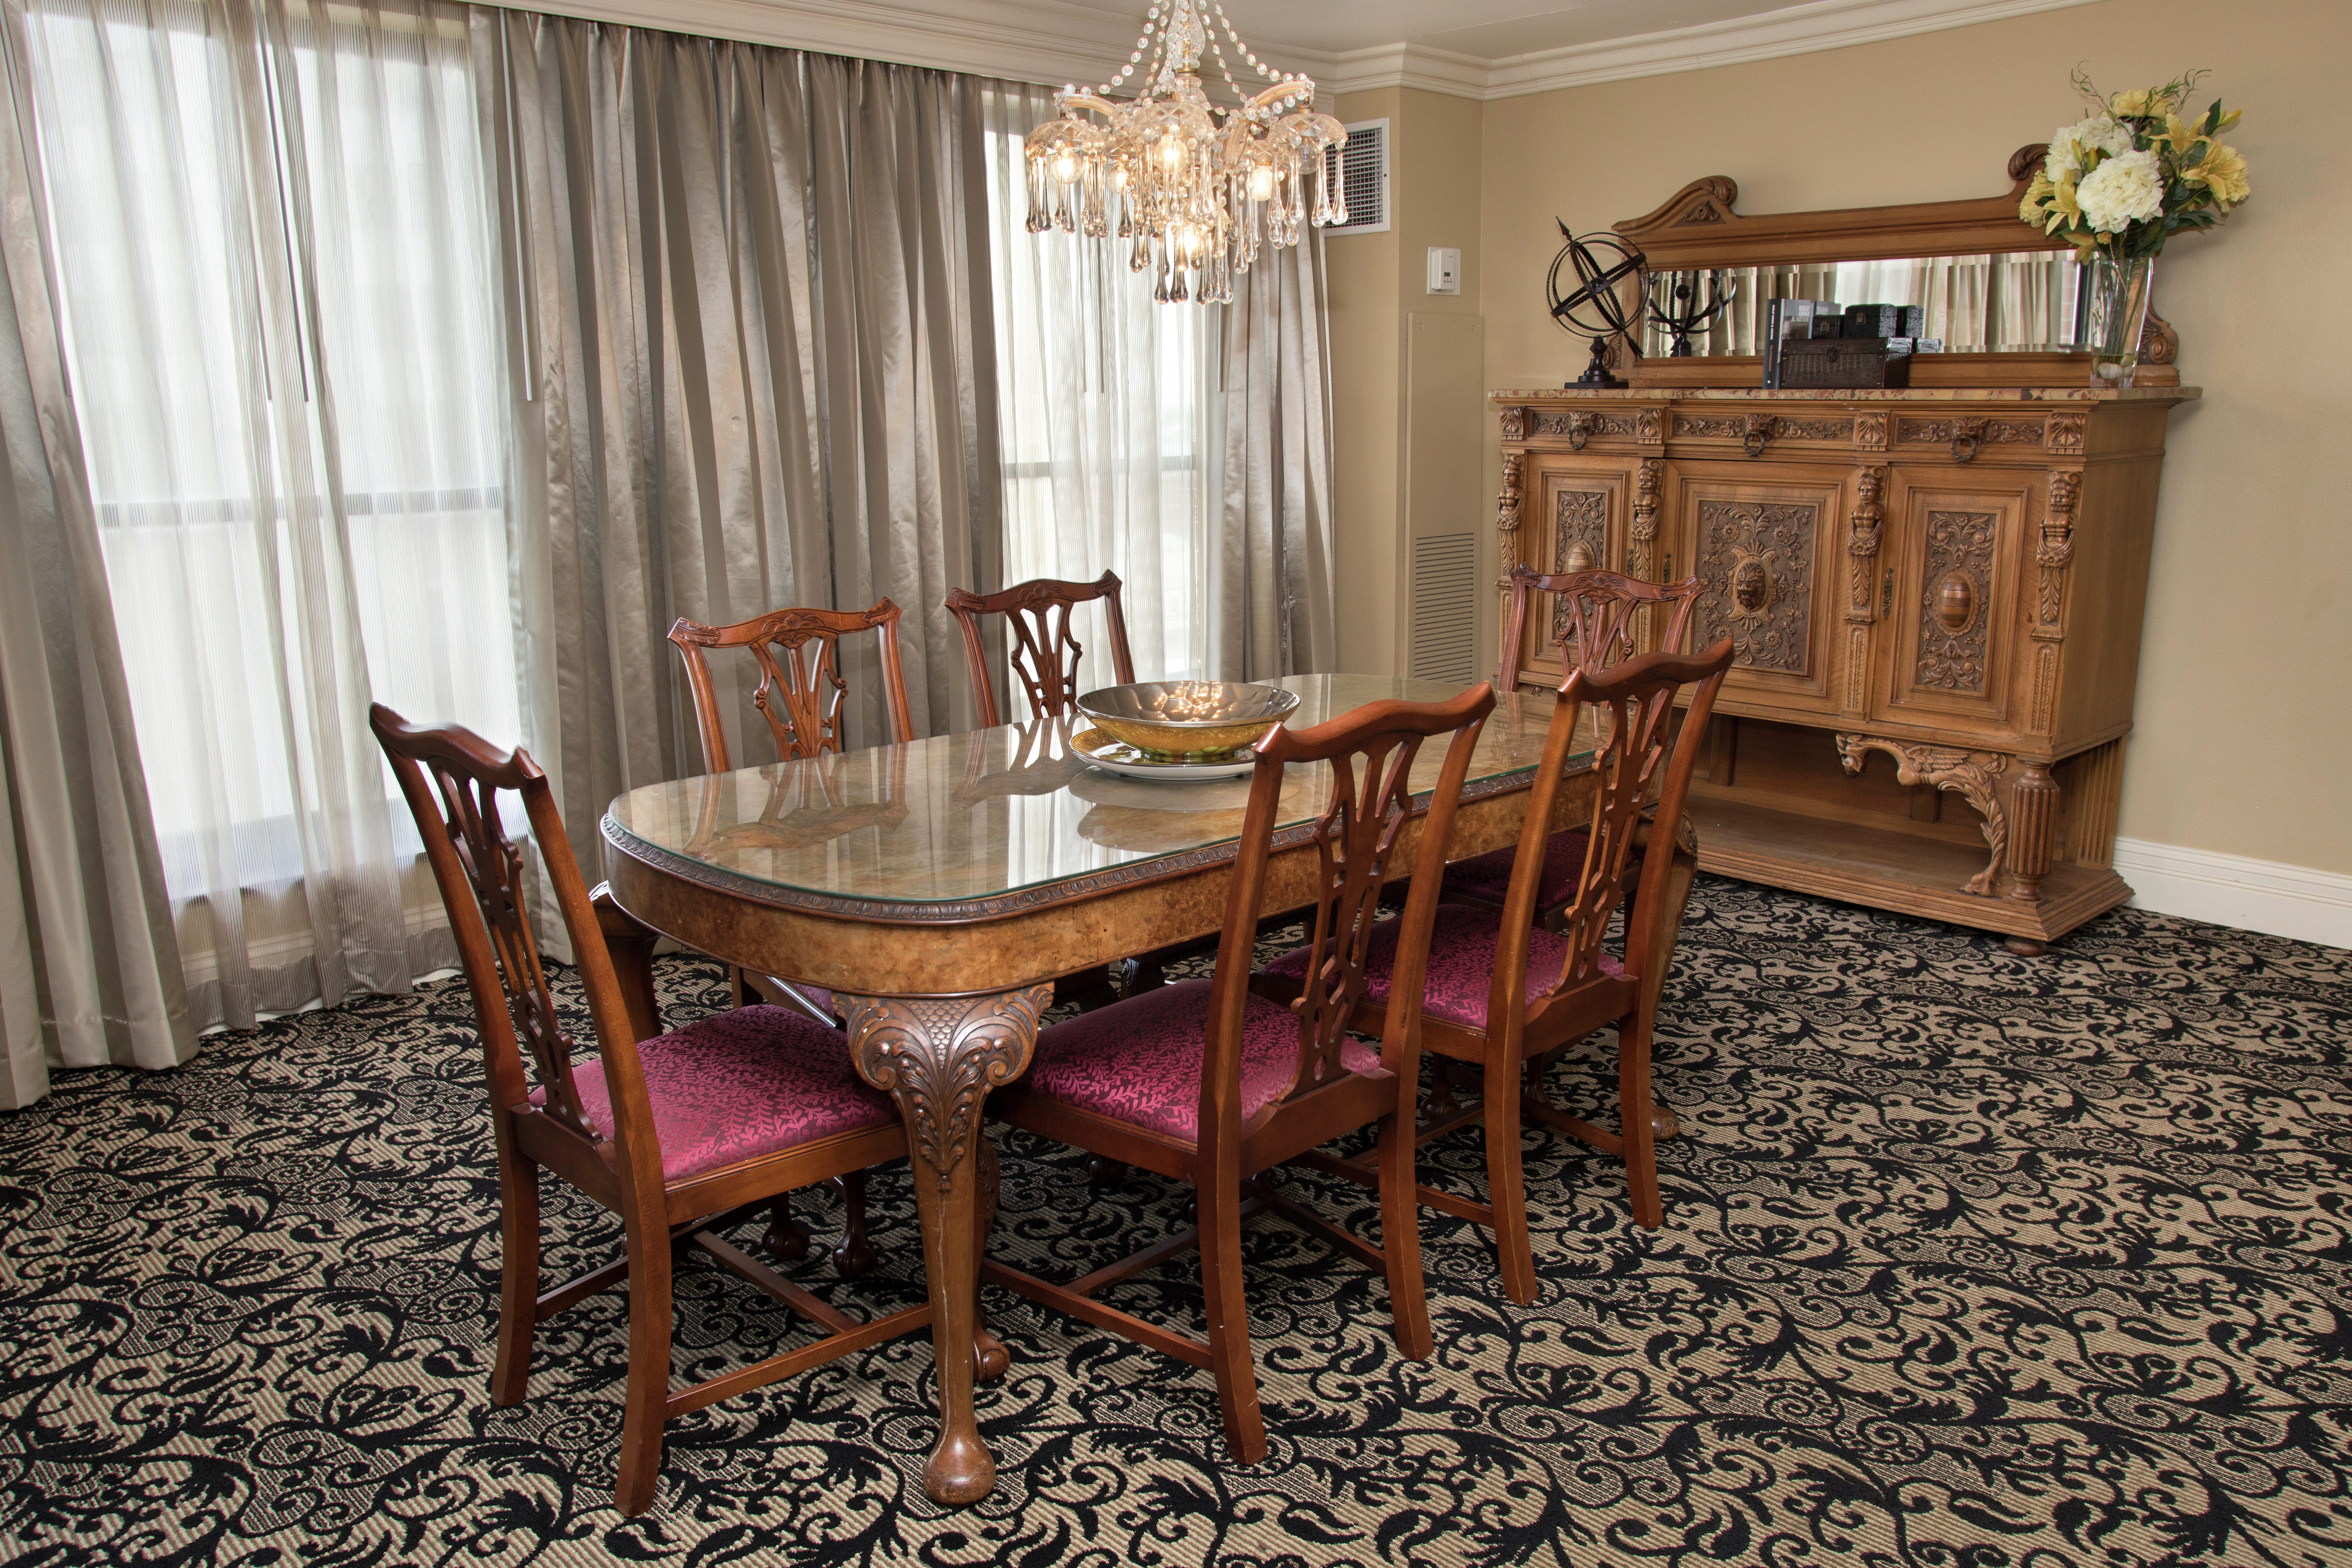 Guest Suite Dining Room Area with Large Table and 6 Chairs